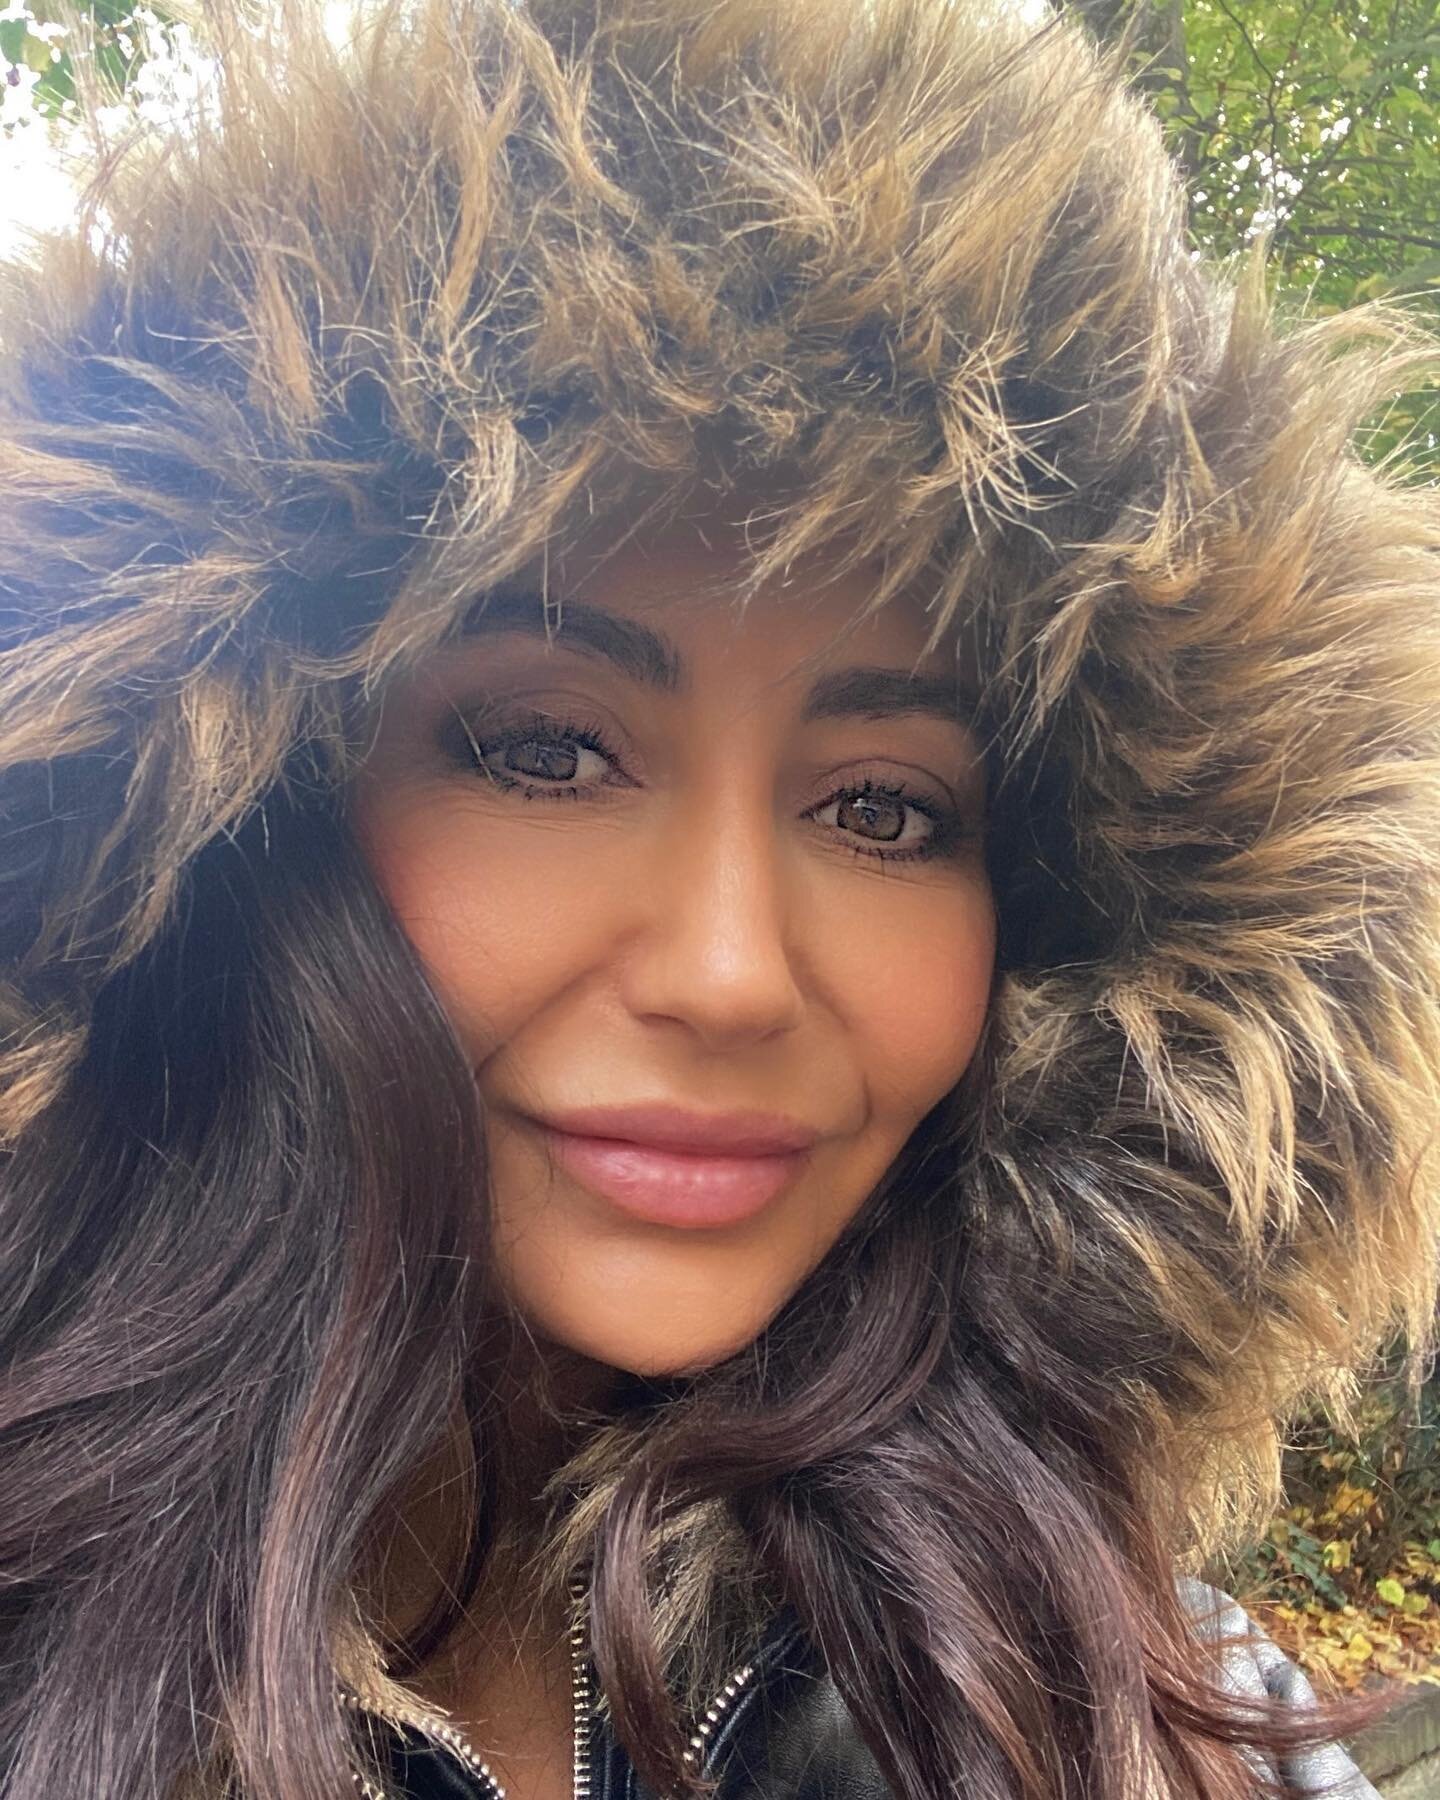 Rugged up, talking to squirrels and eating scones 🧥🐿🍓😁 They are just so cute 🥰 You knkw we don&rsquo;t have squirrels in Australia! 
1. Cosy ☺️
2. Cuties 🐿
3. Red and Leather 💋
4. Magical 🍃🍁
5. Cream then jam or Jam then cream&hellip;that is